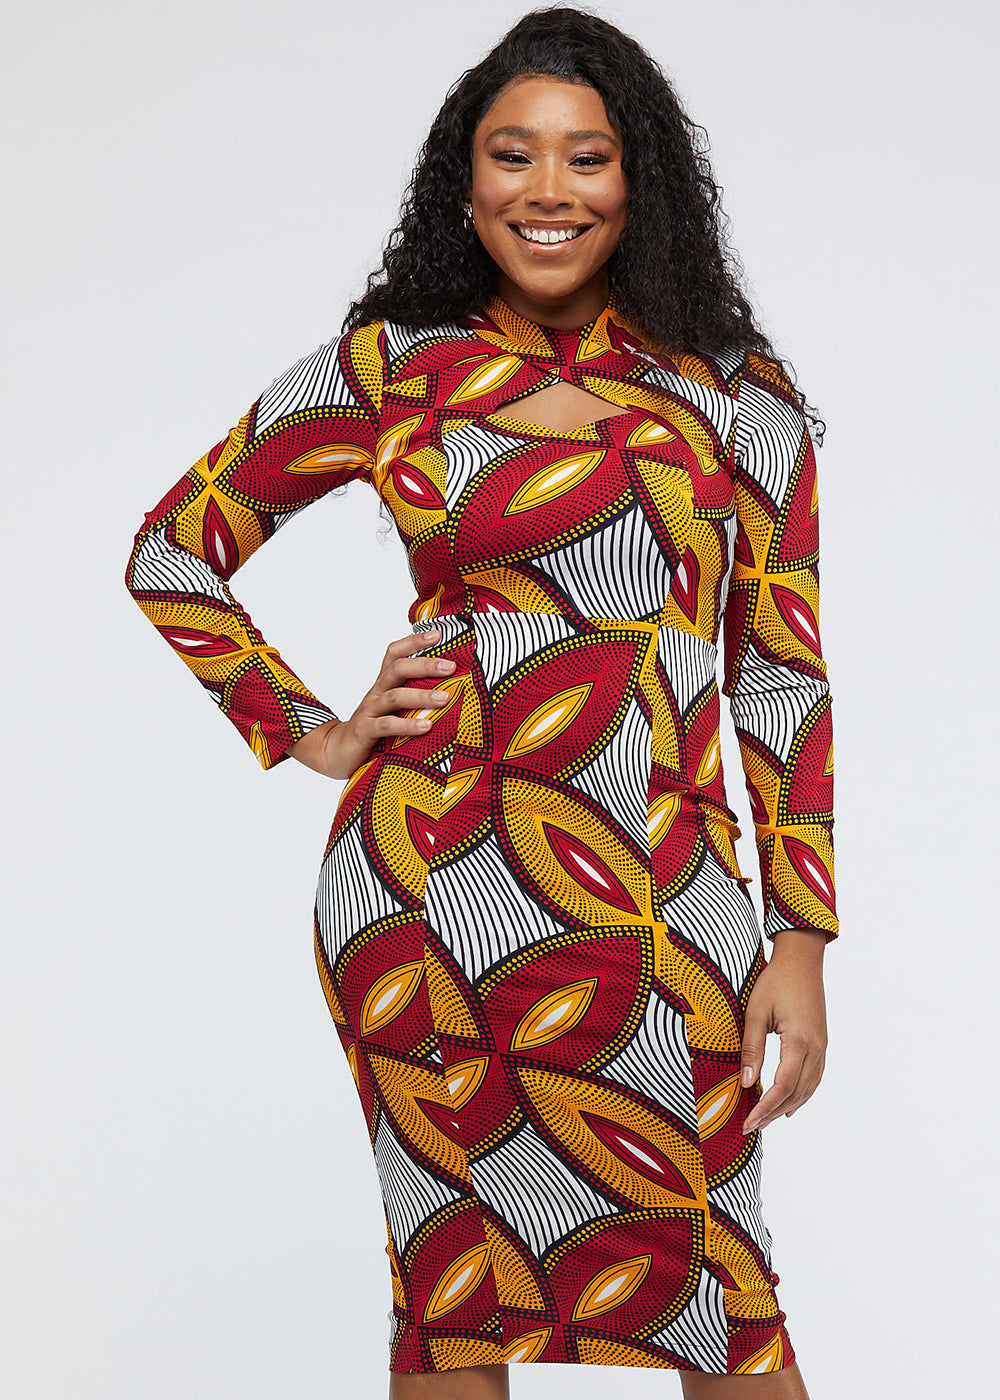 red and gold african dress